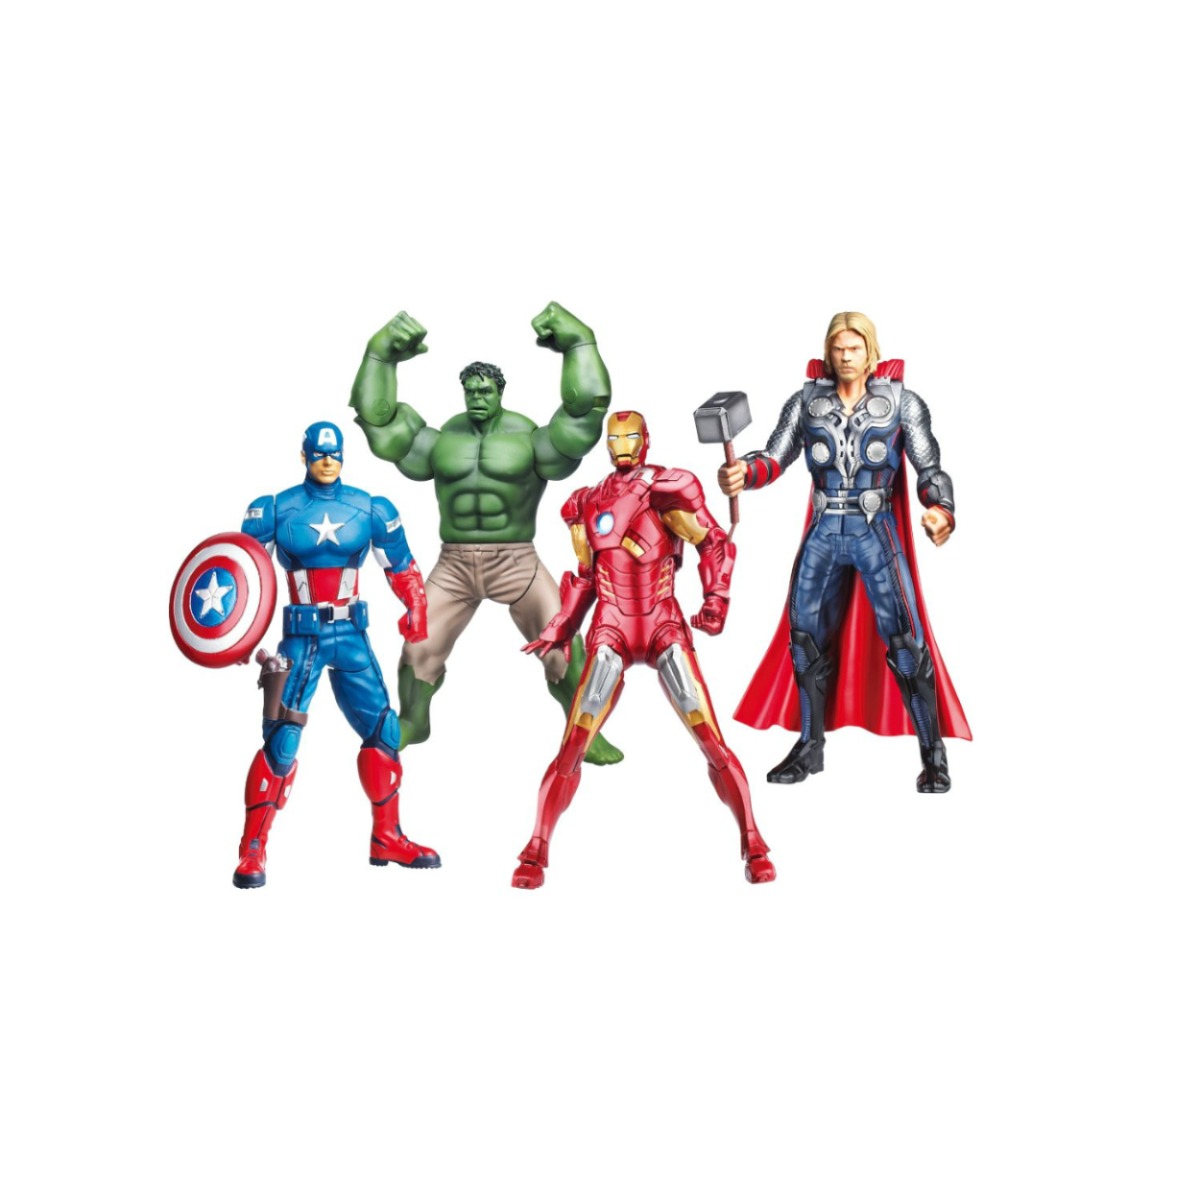 Avengers Free Printable Cards Or Invitations Oh My Fiesta For Geeks - avengers items roblox free new free items